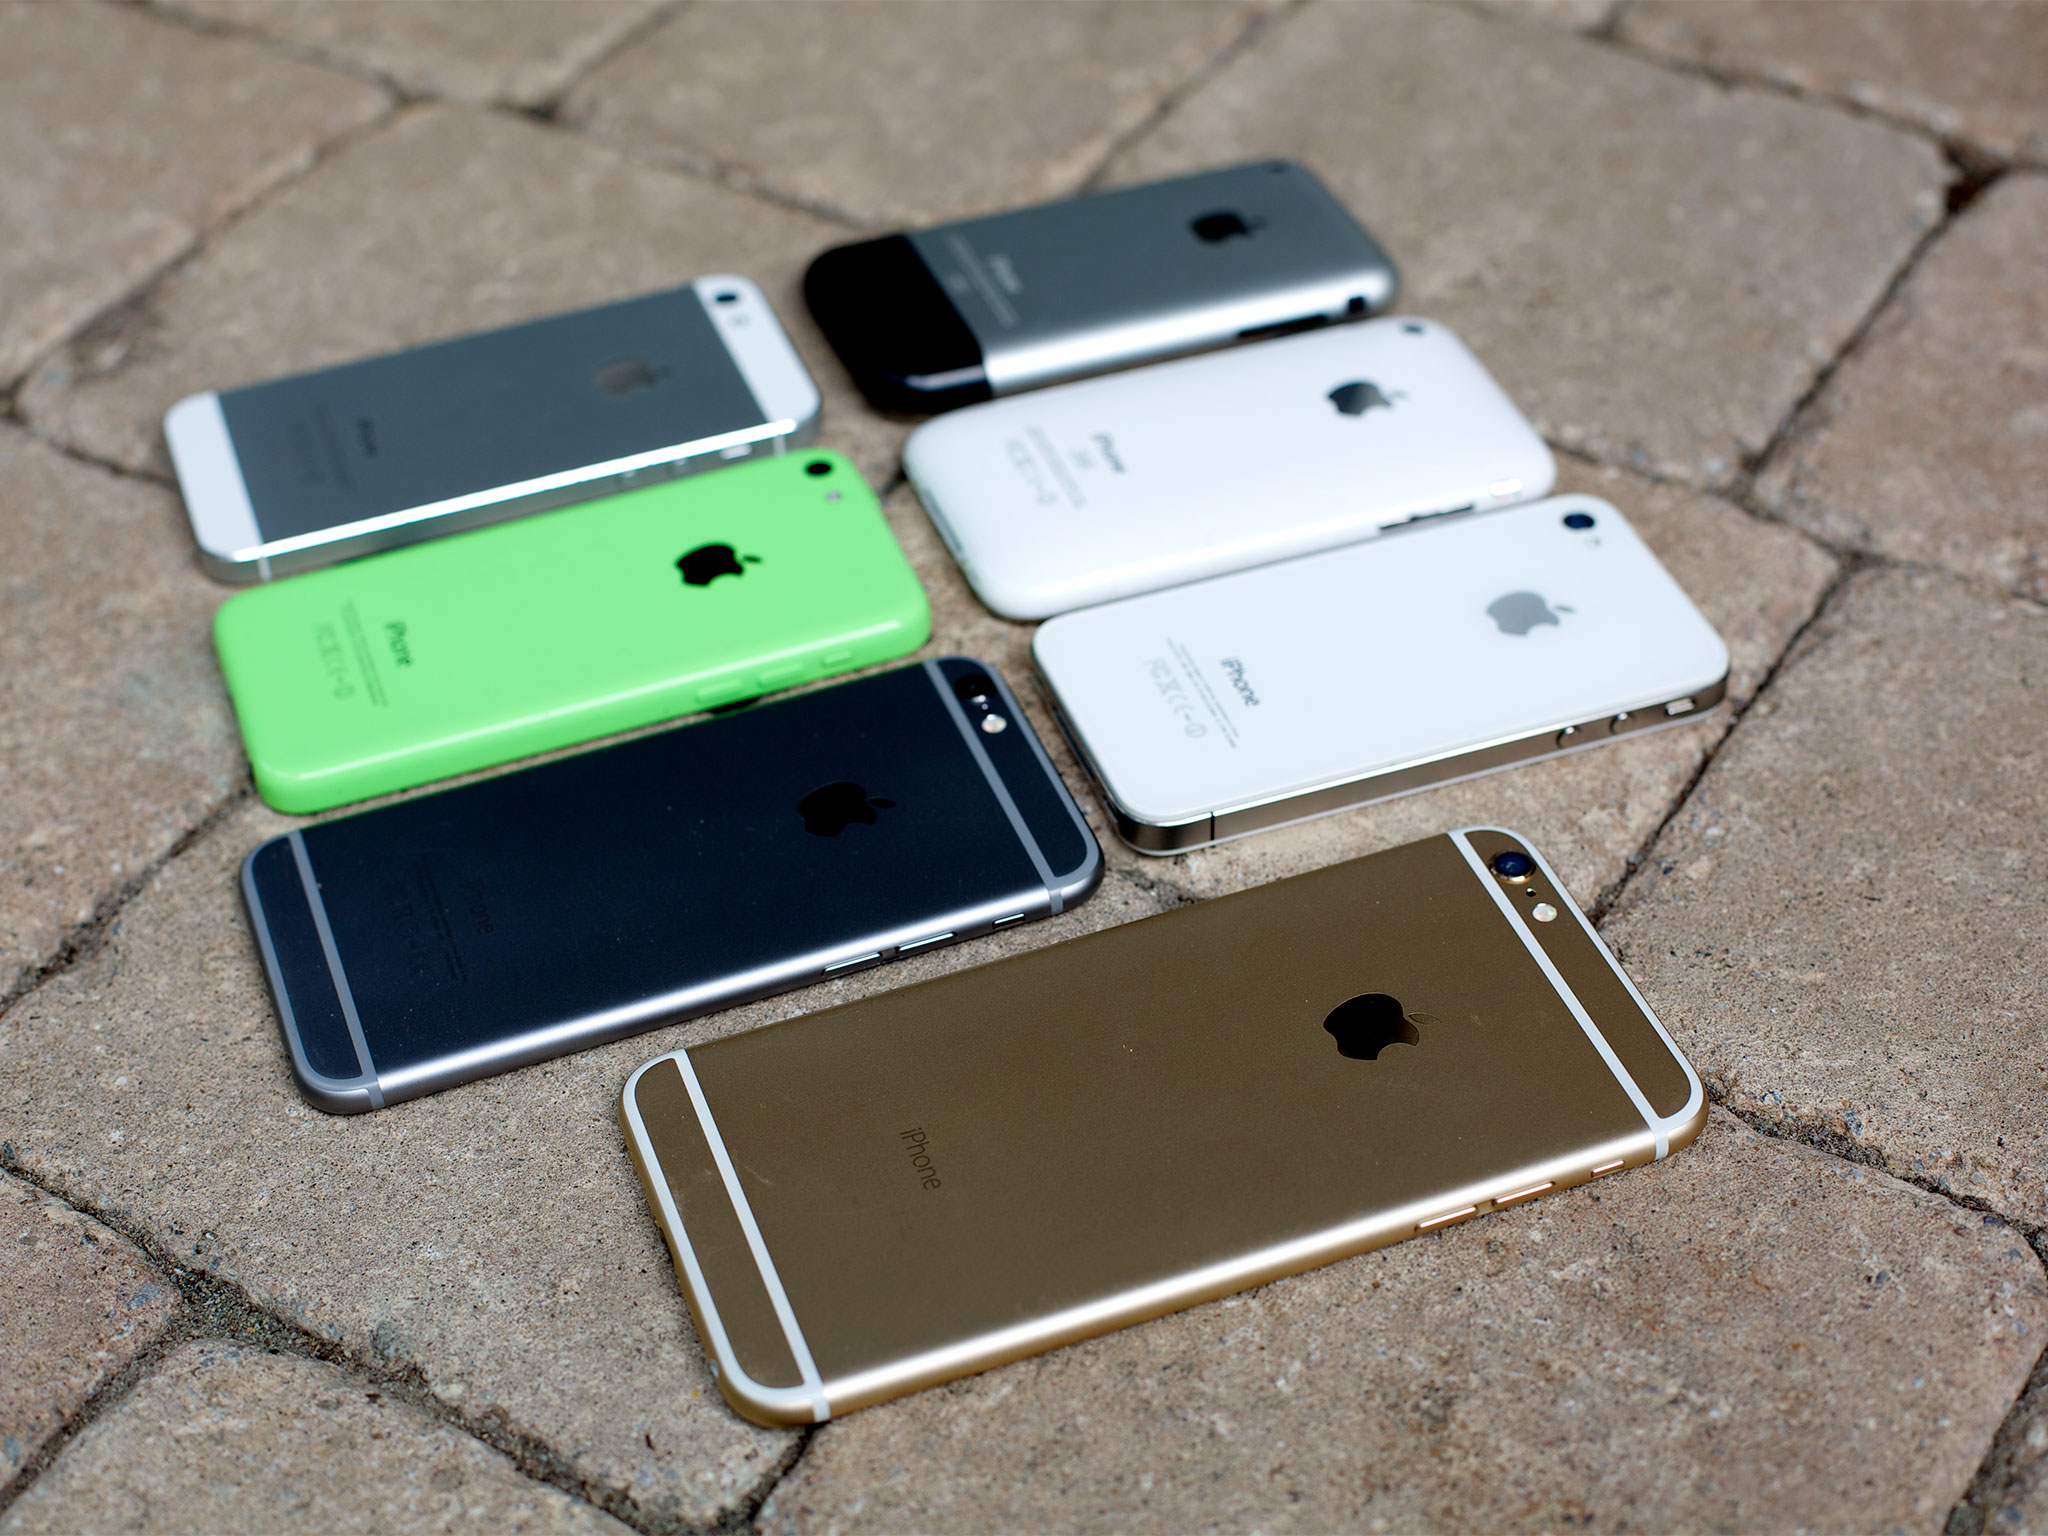 History of iPhone: From revolution to the next big thing